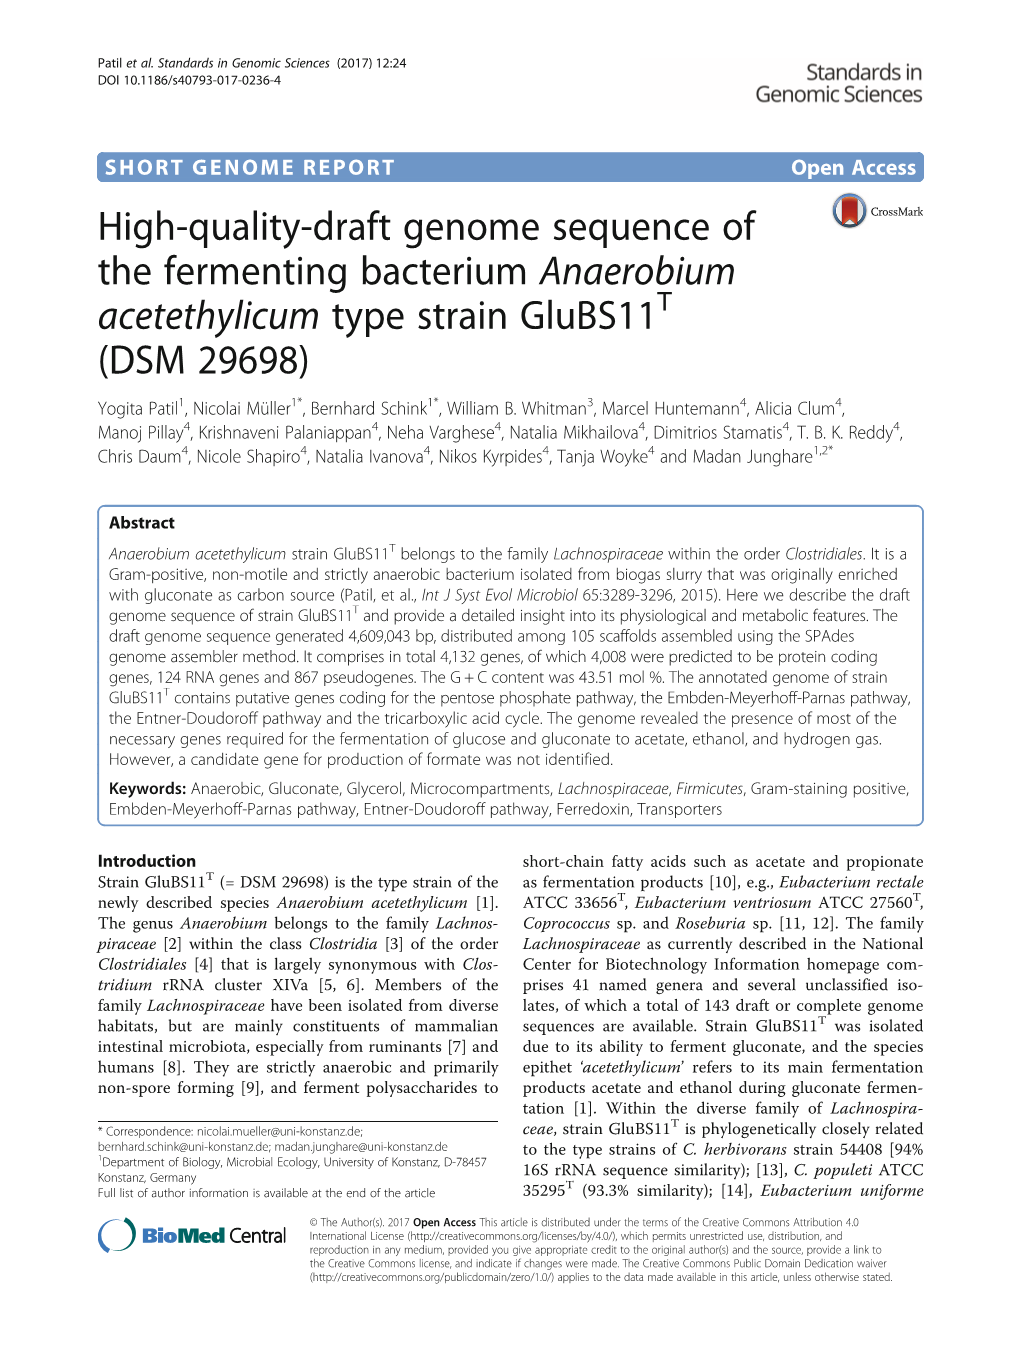 High-Quality-Draft Genome Sequence of the Fermenting Bacterium Anaerobium Acetethylicum Type Strain Glubs11t (DSM 29698)